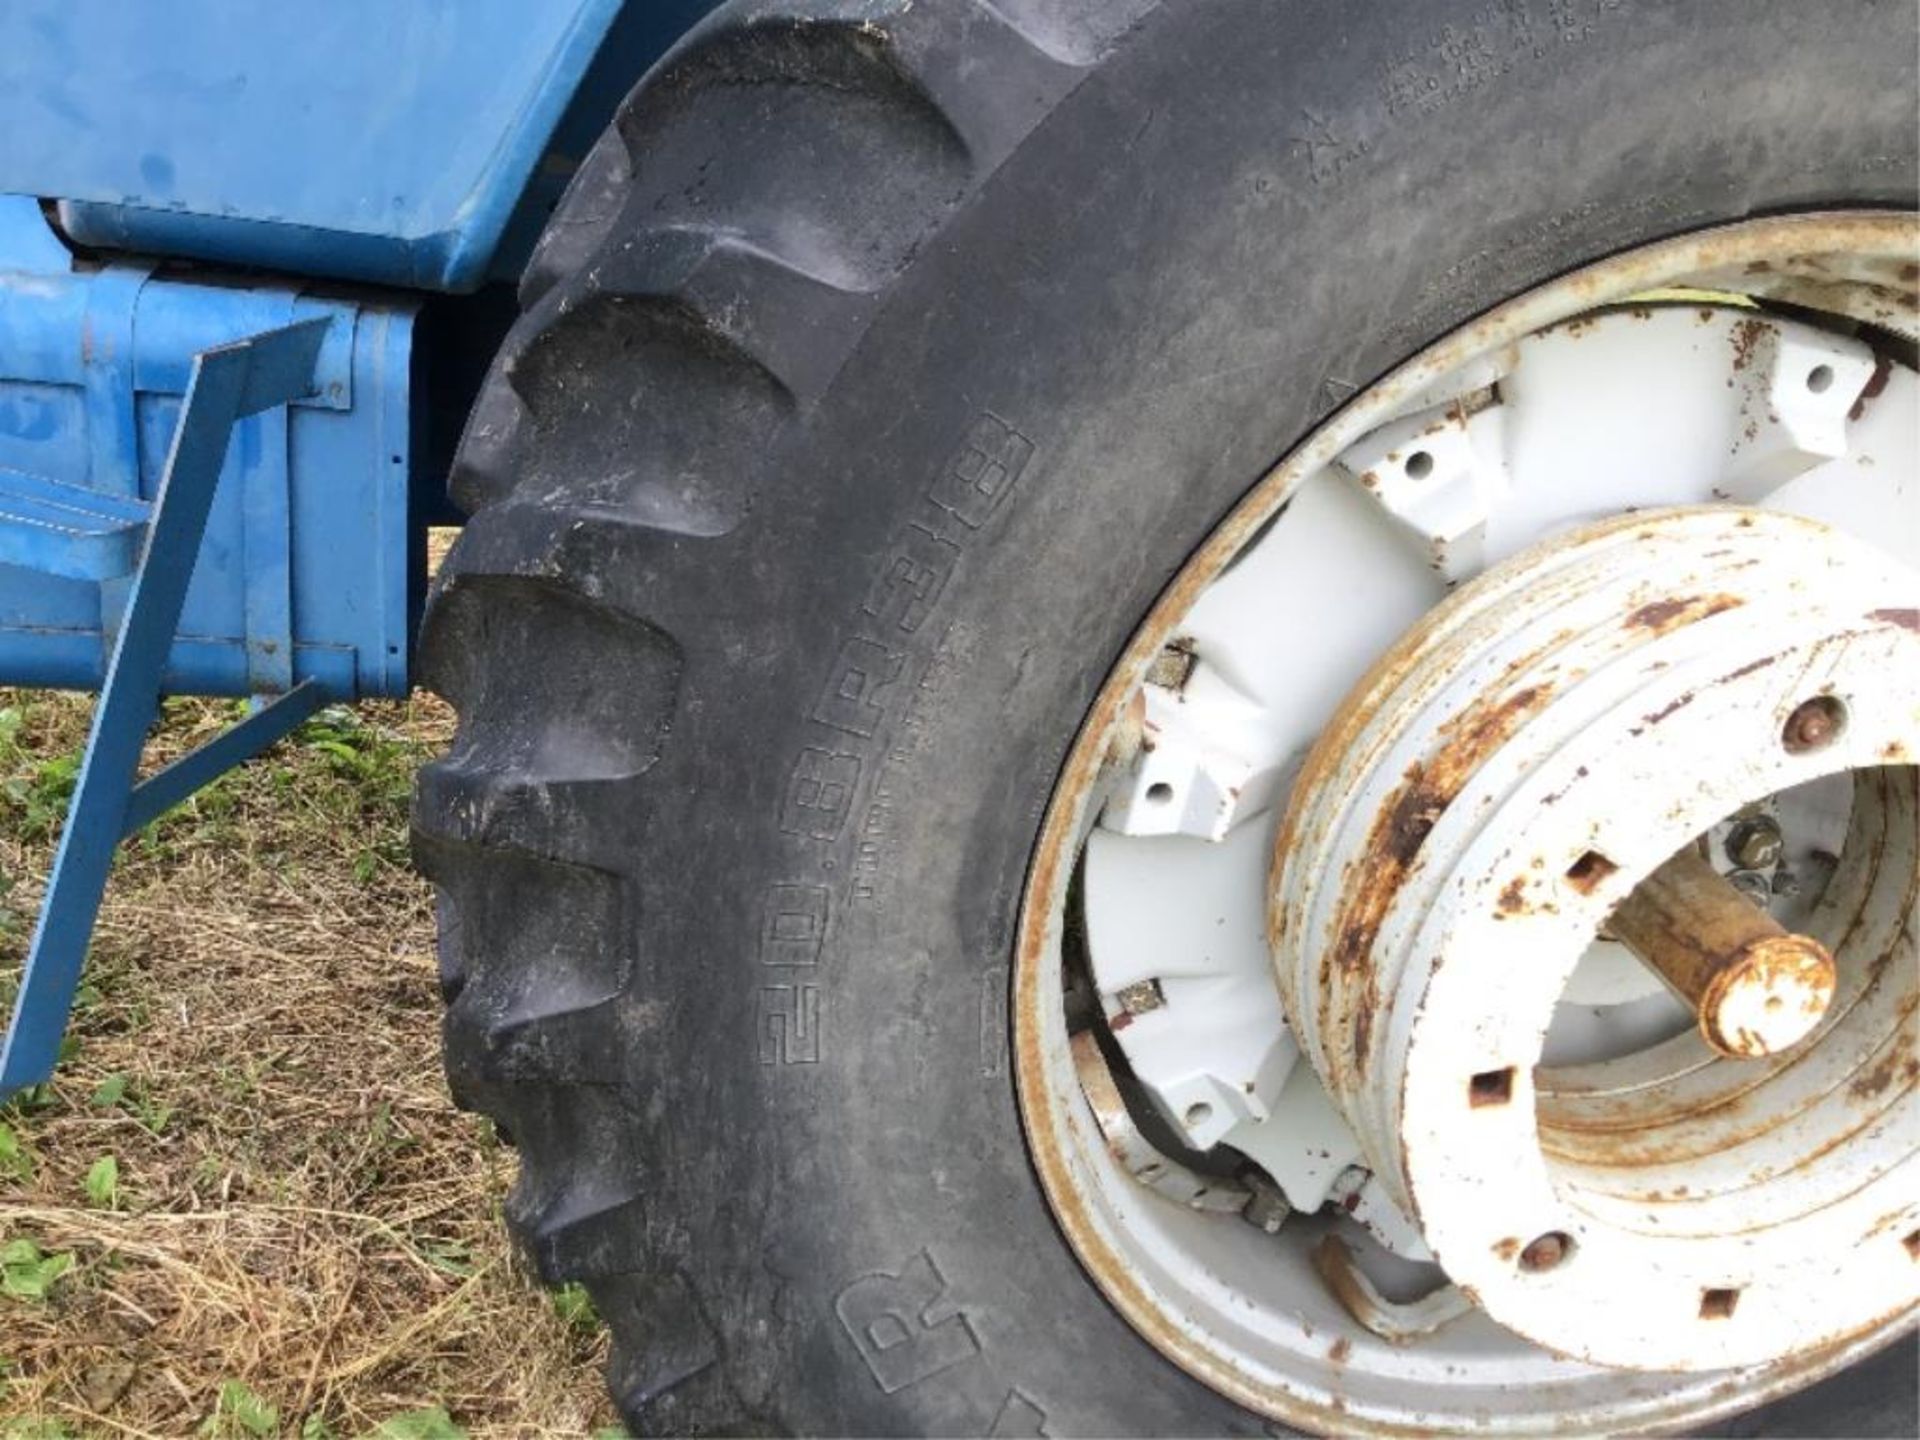 1983 Ford TW-35 MFWD Tractor Rear Wheel Weights, 190hp, 20.8R38 rr, 14.9-28fr, 3 hyd, 1000PTO, 5011h - Image 5 of 16